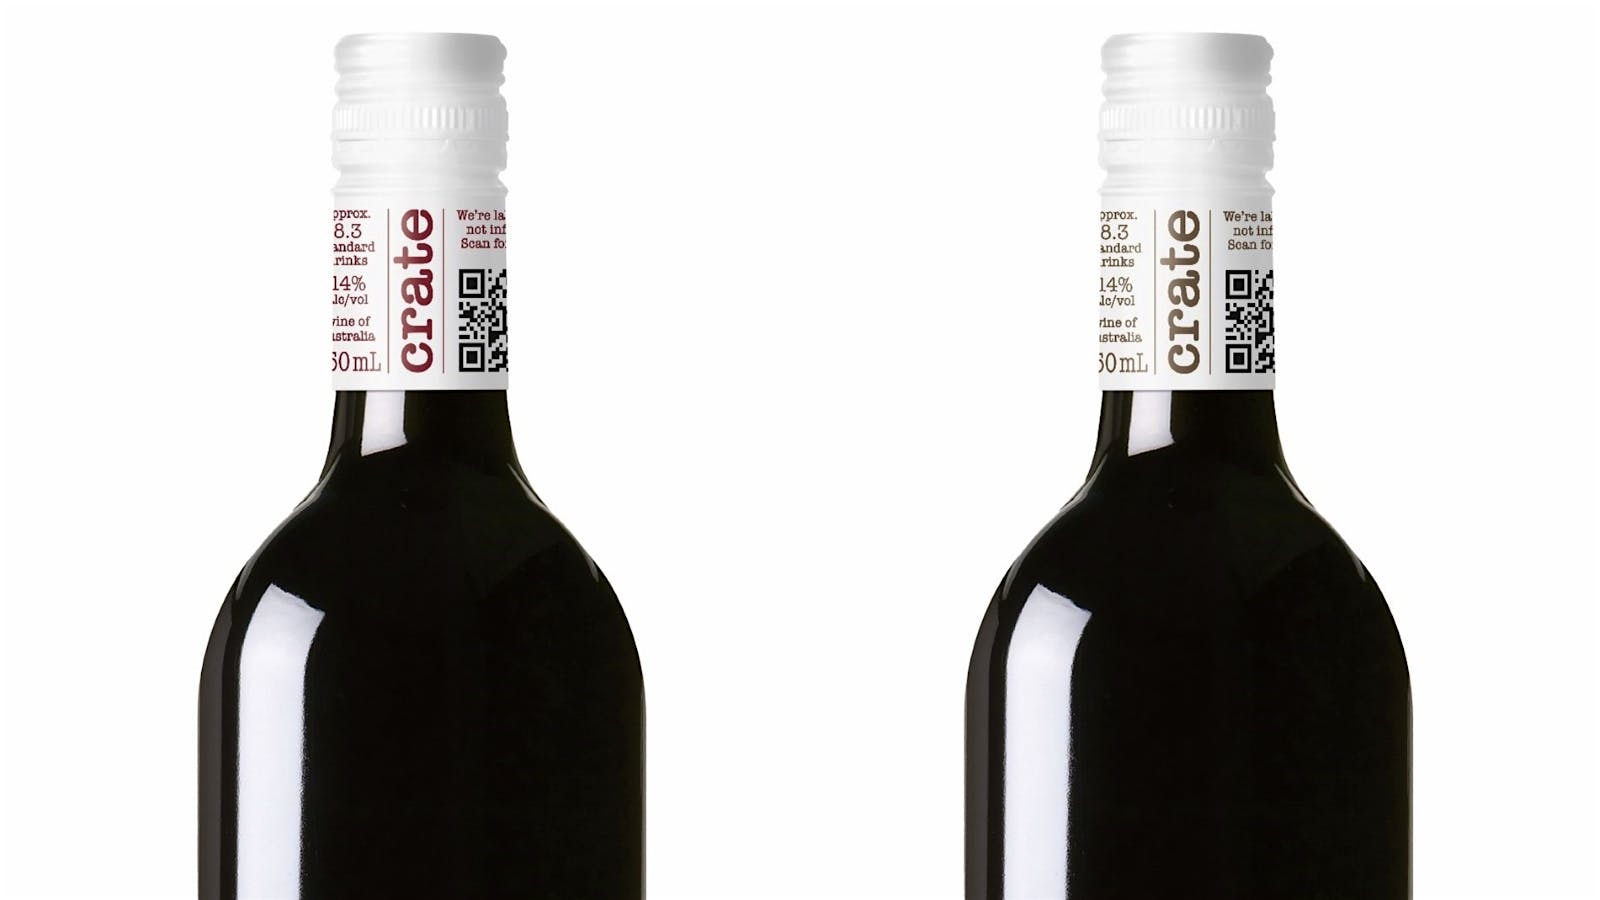 Paperless Bottles: A New Path for Eco-Friendly Wine?